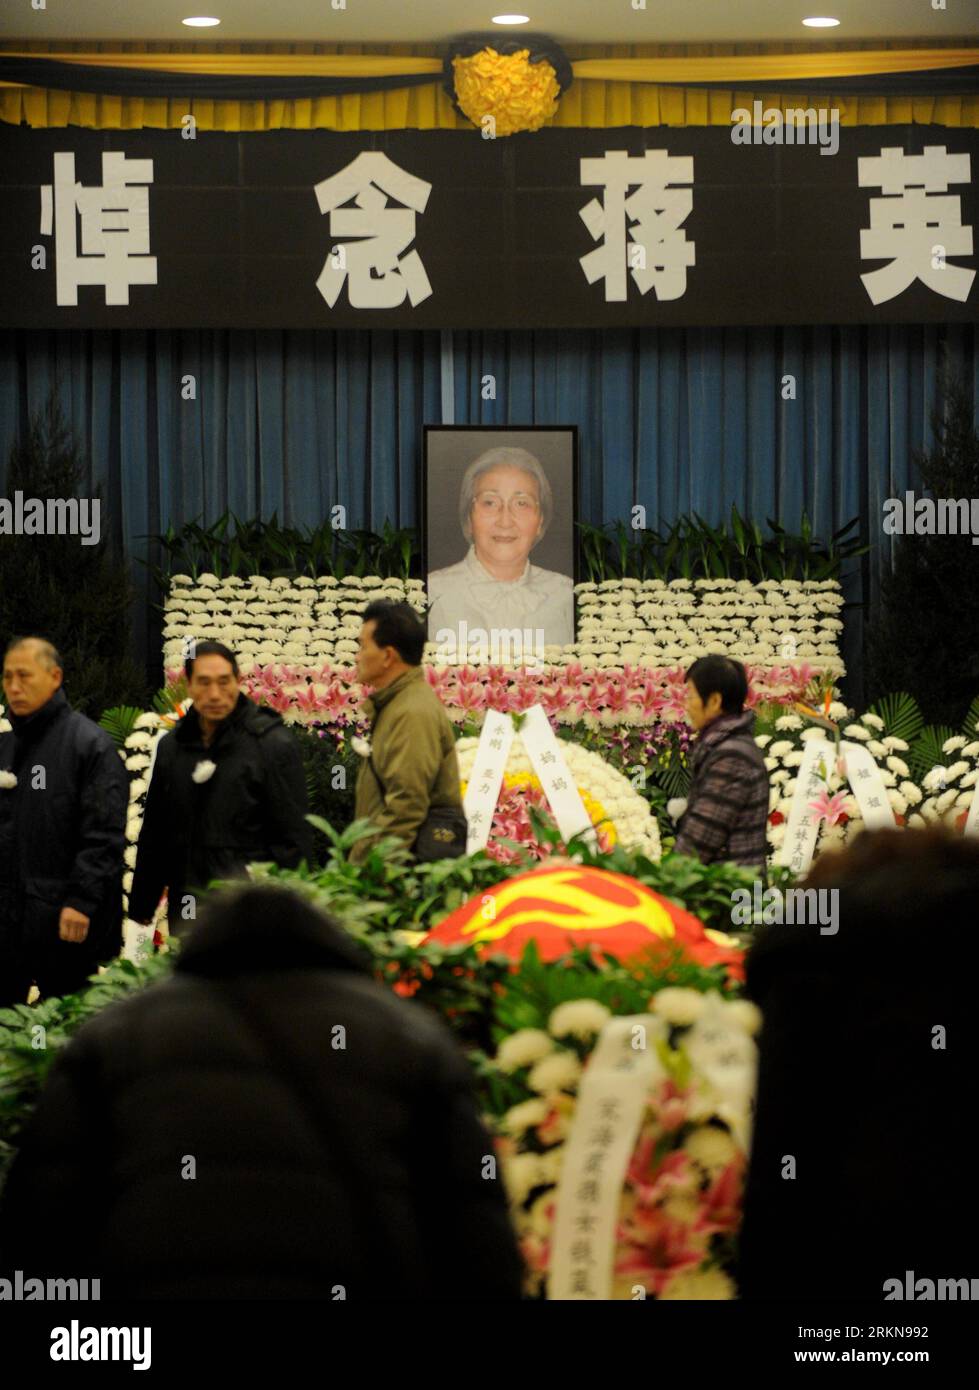 Bildnummer: 57047594  Datum: 10.02.2012  Copyright: imago/Xinhua (120210) -- BEIJING, Feb. 10, 2012 (Xinhua) -- attend the mourning ceremony of Jiang Ying, an opera singer and music educator and wife of China s late rocket scientist Qian Xuesen, in Beijing, capital of China, Feb. 10, 2012. Jiang died on Sunday of respiratory and heart failure in Beijing at the age of 93. (Xinhua/Luo Xiaoguang) (zgp) CHINA-BEIJING-JIANG YING-MOURNING CEREMONY (CN) PUBLICATIONxNOTxINxCHN People Kultur Musik Trauer Gedenken xbs x0x 2012 hoch      57047594 Date 10 02 2012 Copyright Imago XINHUA  Beijing Feb 10 201 Stock Photo